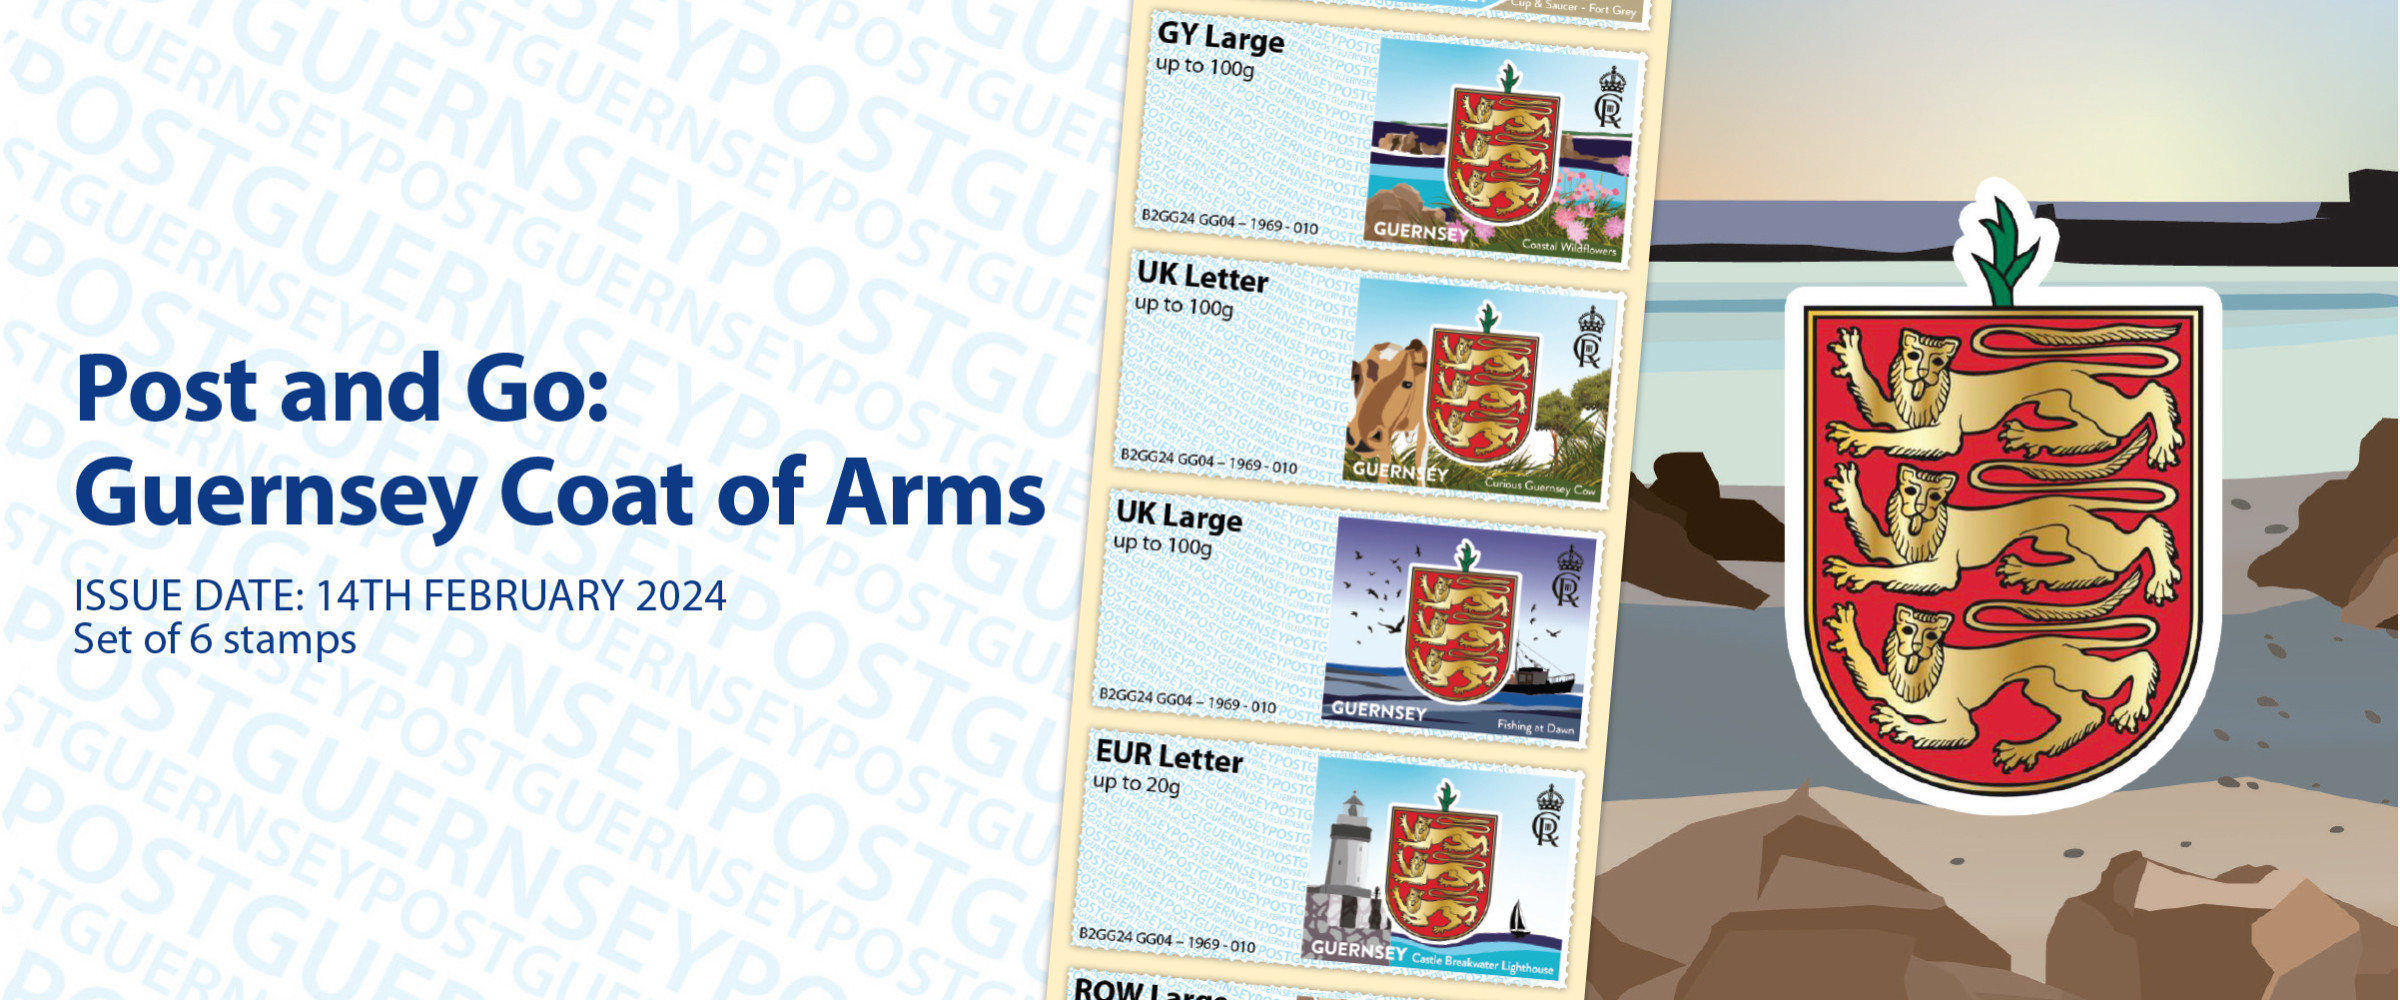 Post and Go: Guernsey Coat of Arms